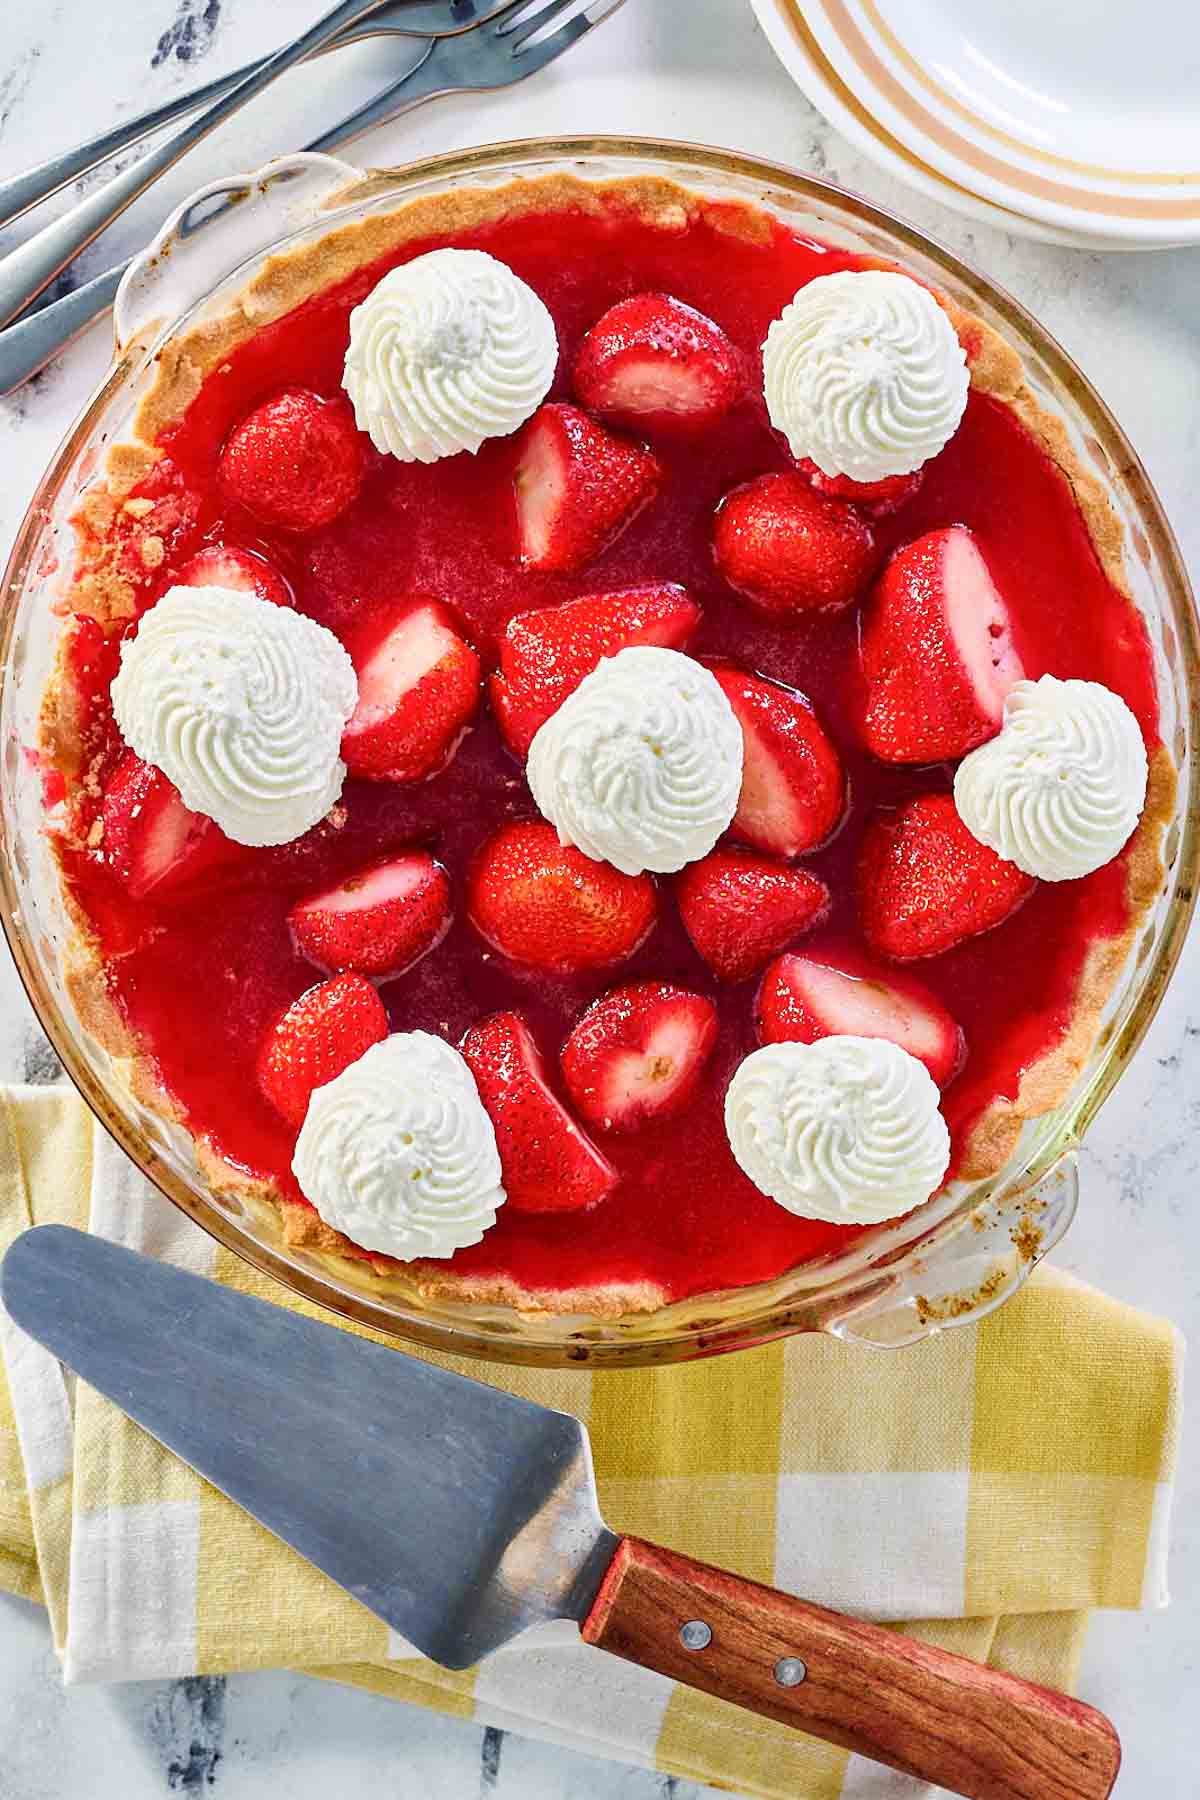 Old fashioned strawberry pie with fresh strawberries.